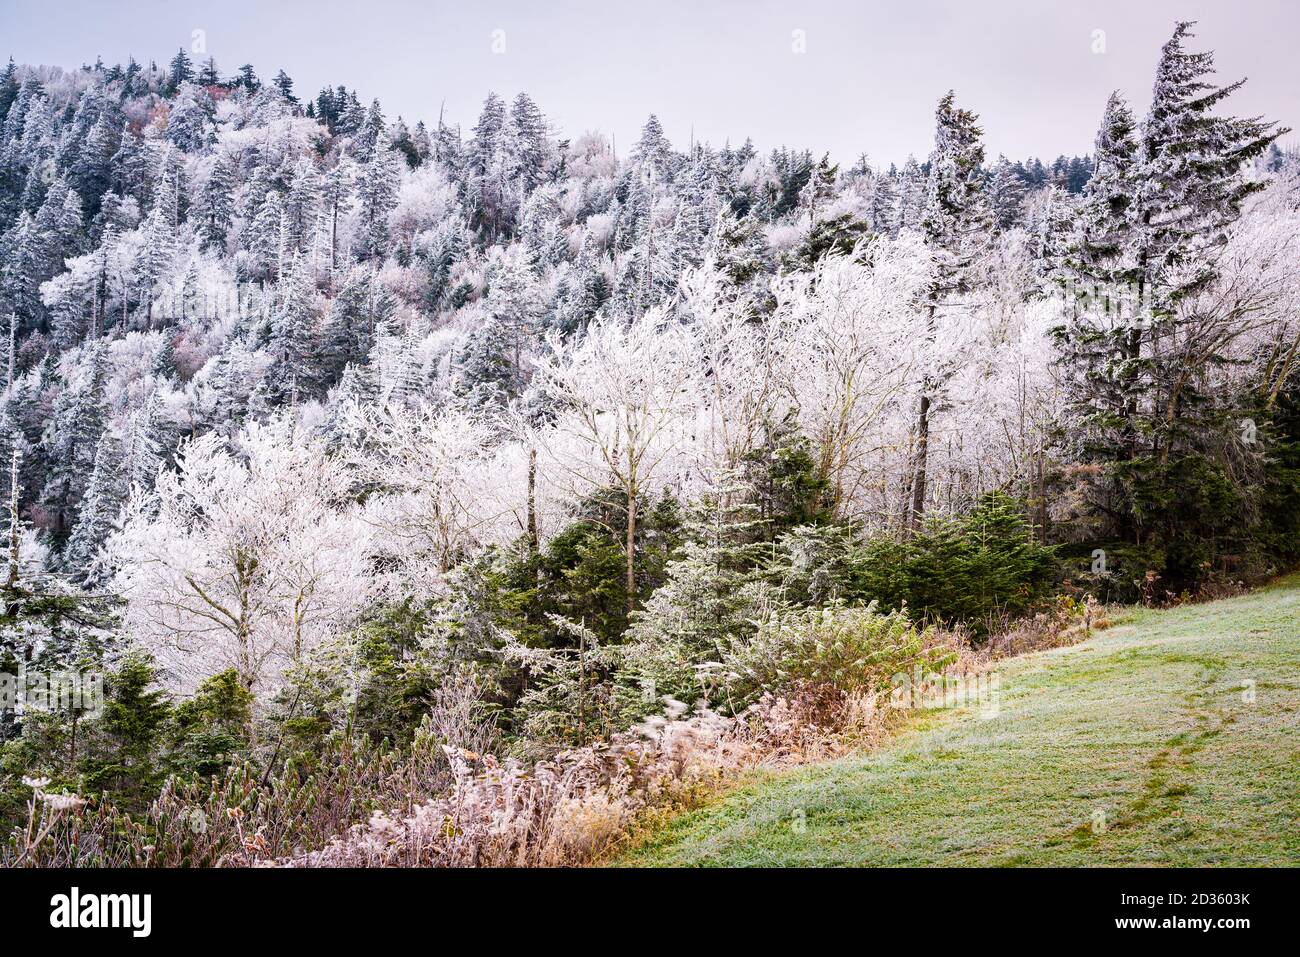 Great Smoky Mountains National Park, USA in prima stagione invernale. Foto Stock